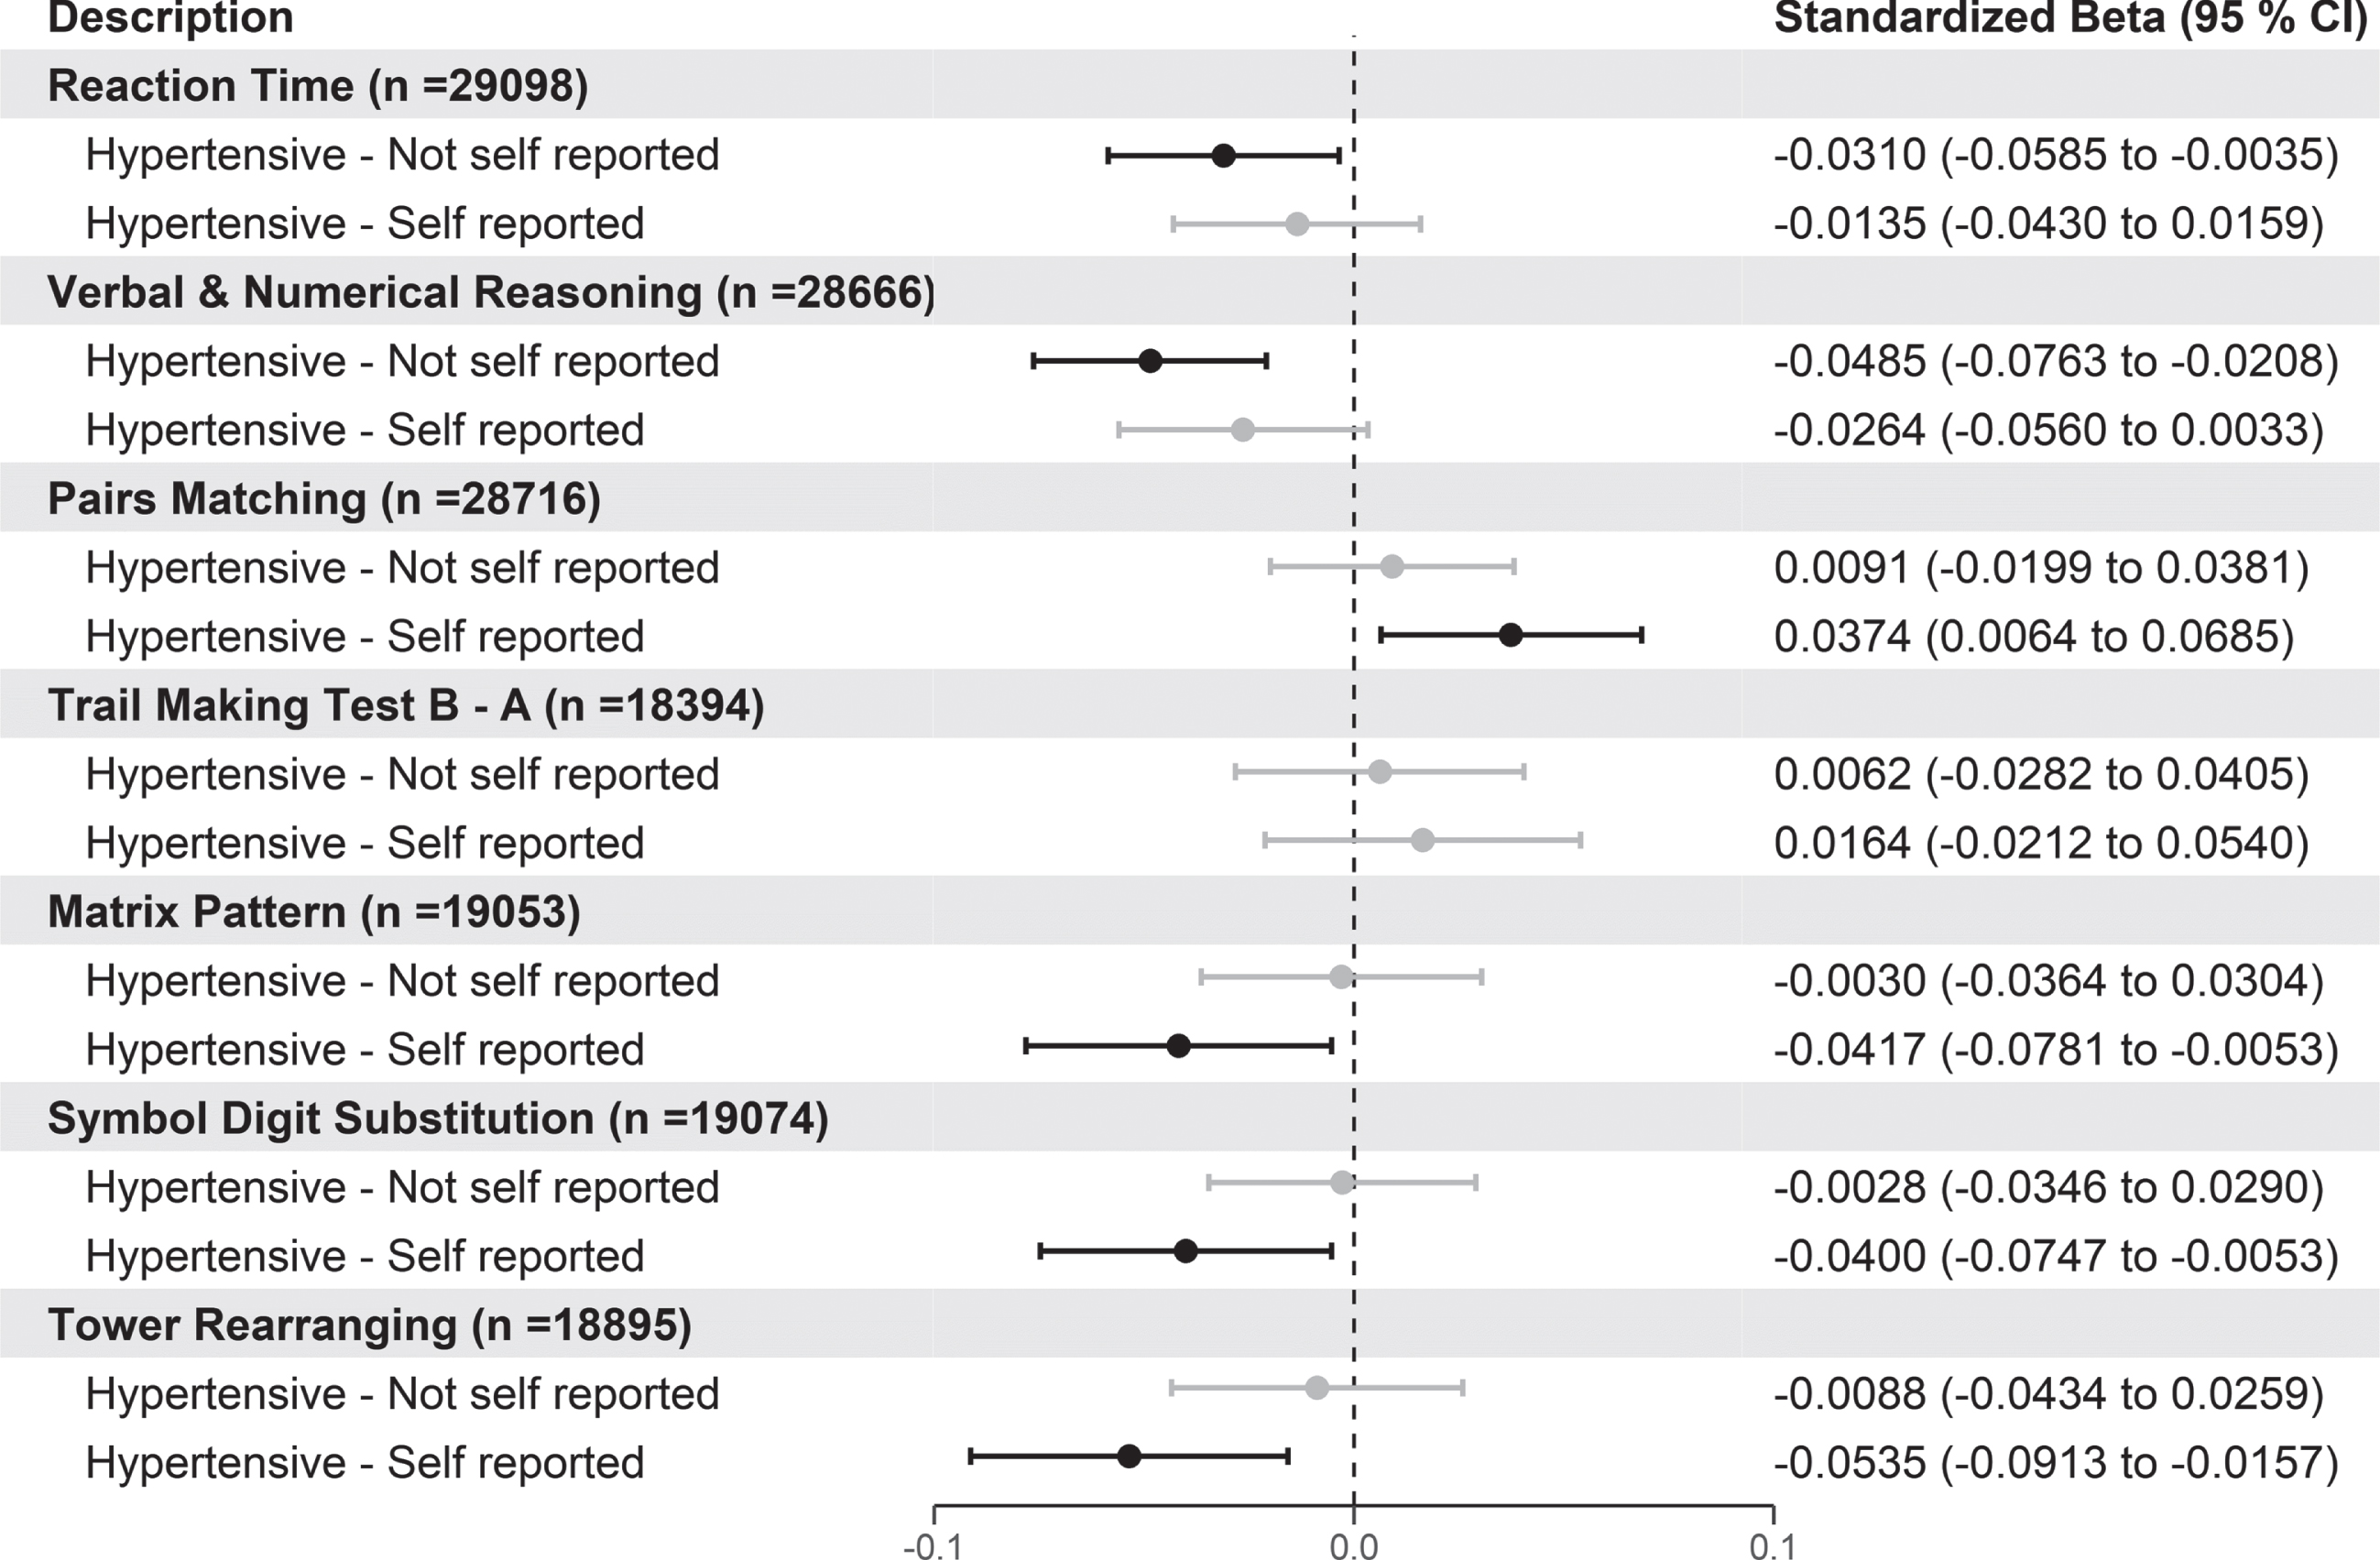 Forest plot showing the association of cognitive tests with hypertensive participants with and without self-reported hypertension versus normotensive participants. Black circles indicate standardized betas with p values < 0.05. For the cognitive tests, negative values indicate better cognitive function for reaction time, pairs matching, and TMT B-A, whereas positive scores indicate better cognitive scores for verbal and numerical reasoning, matrix pattern, symbol digit substitution, and tower rearranging. p values are adjusted using FDR.